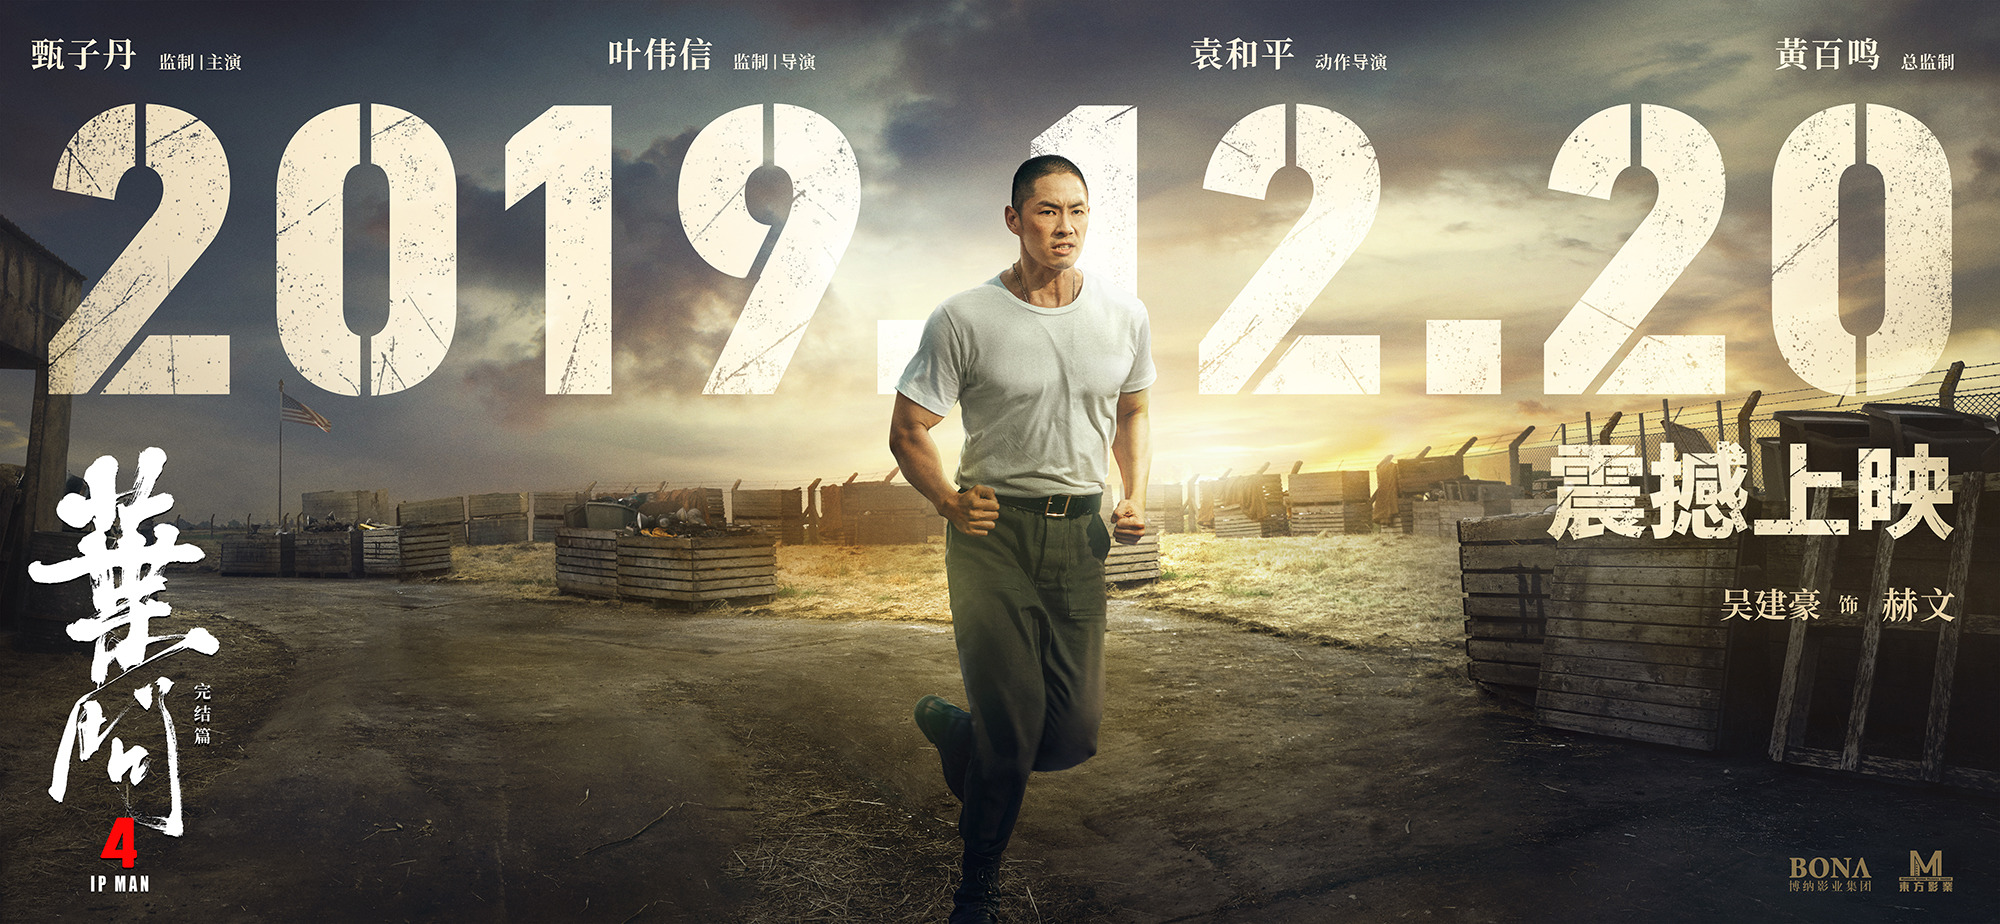 Mega Sized Movie Poster Image for Yip Man 4 (#4 of 15)